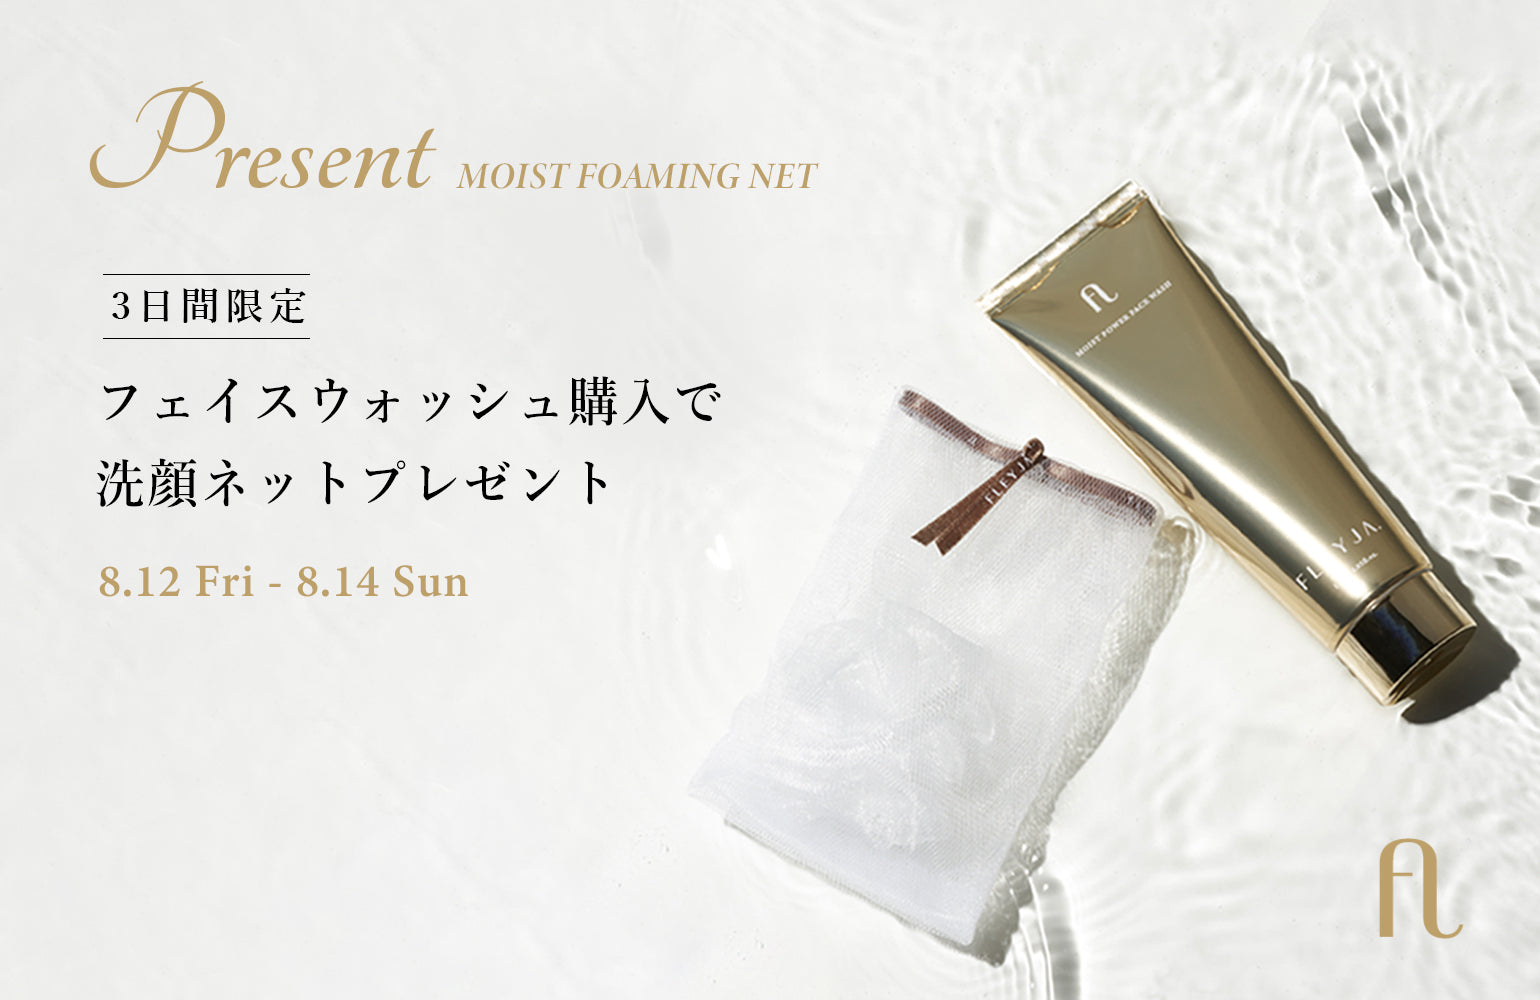 【3DAYS ONLY】MOIST FOAMING NET PRESENT CAMPAIGN＊